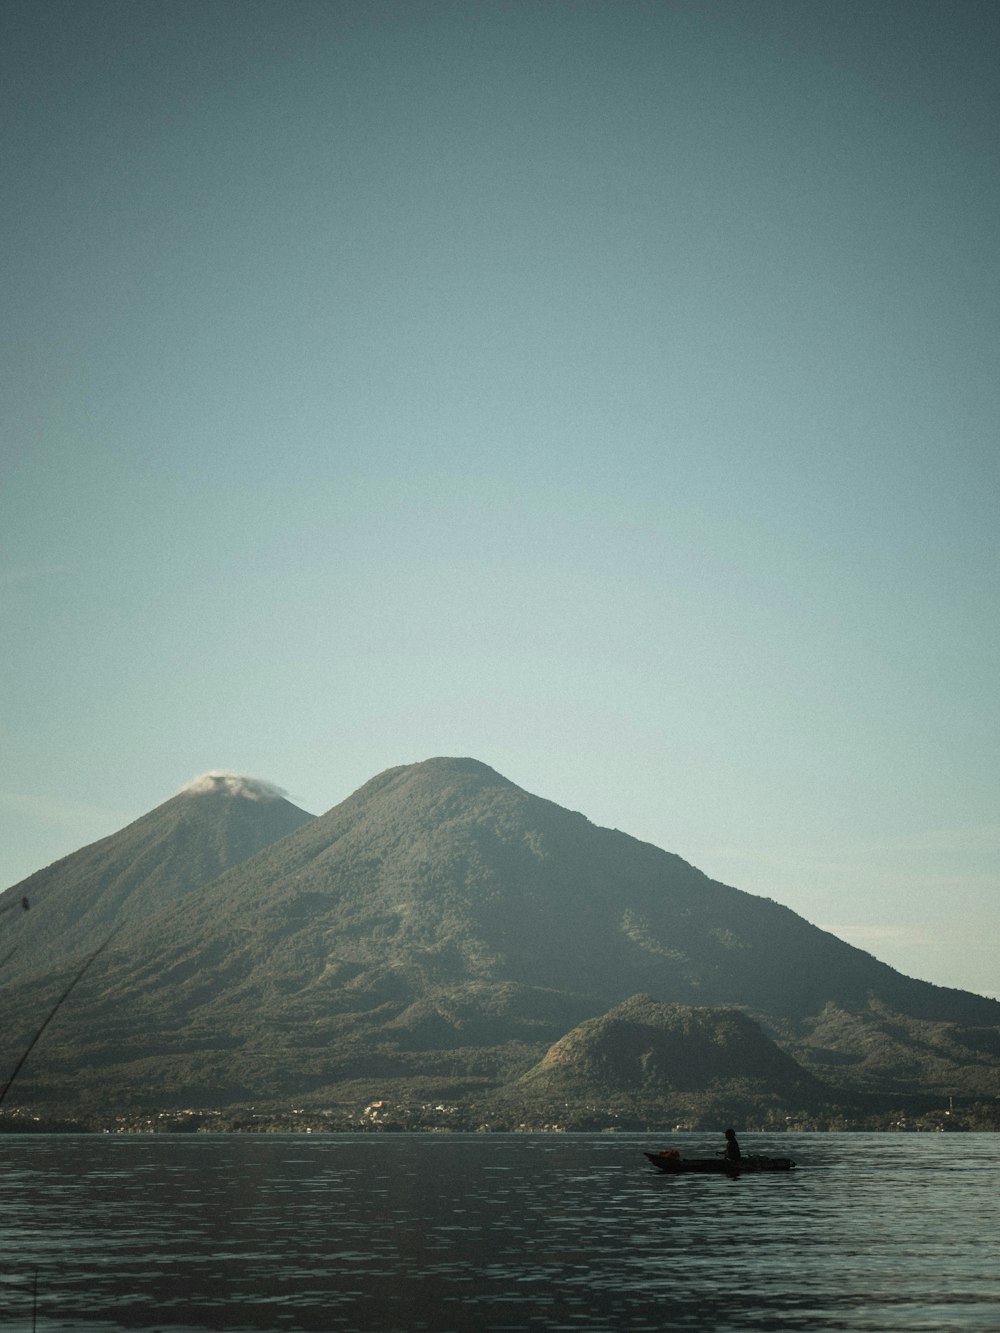 a person in a boat on a lake with a mountain in the background